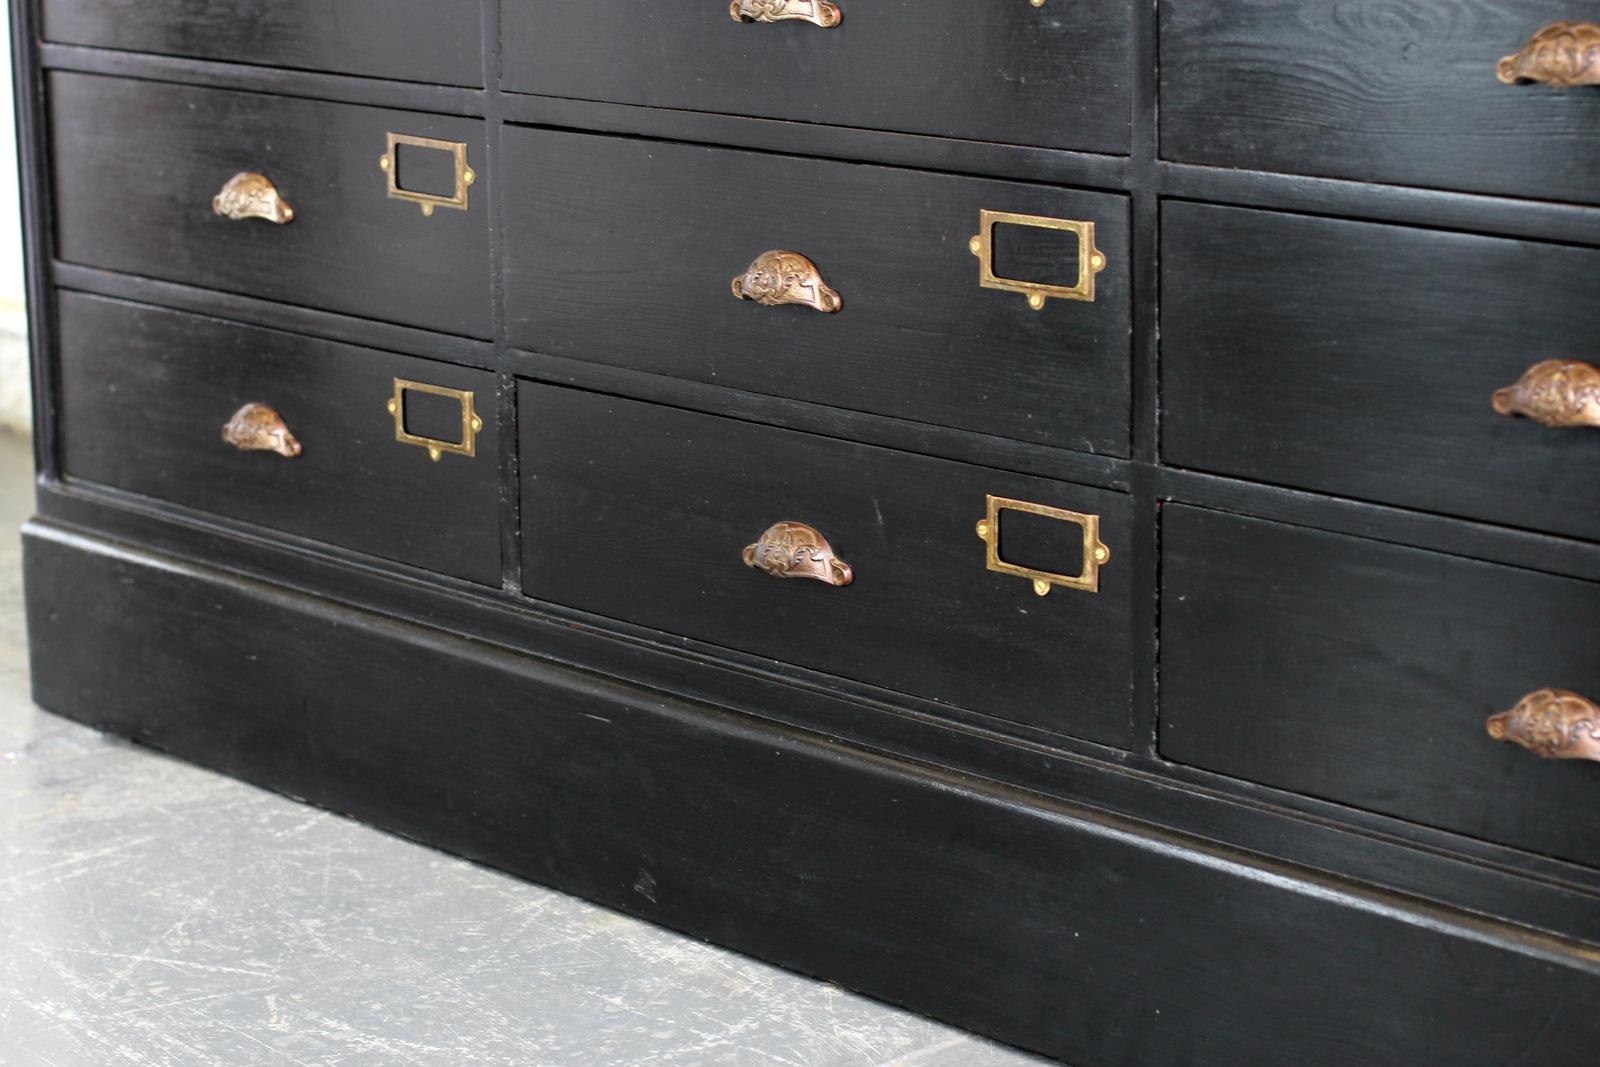 Ebonised French Apothecary drawers, circa 1910

- Solid pine drawers
- Ornate cast iron handles and brass card holders
- Oak top
- Pine Panel sides
- 9 identical large drawers
- French, circa 1910
- Measures: 185cm long x 56cm deep x 77cm